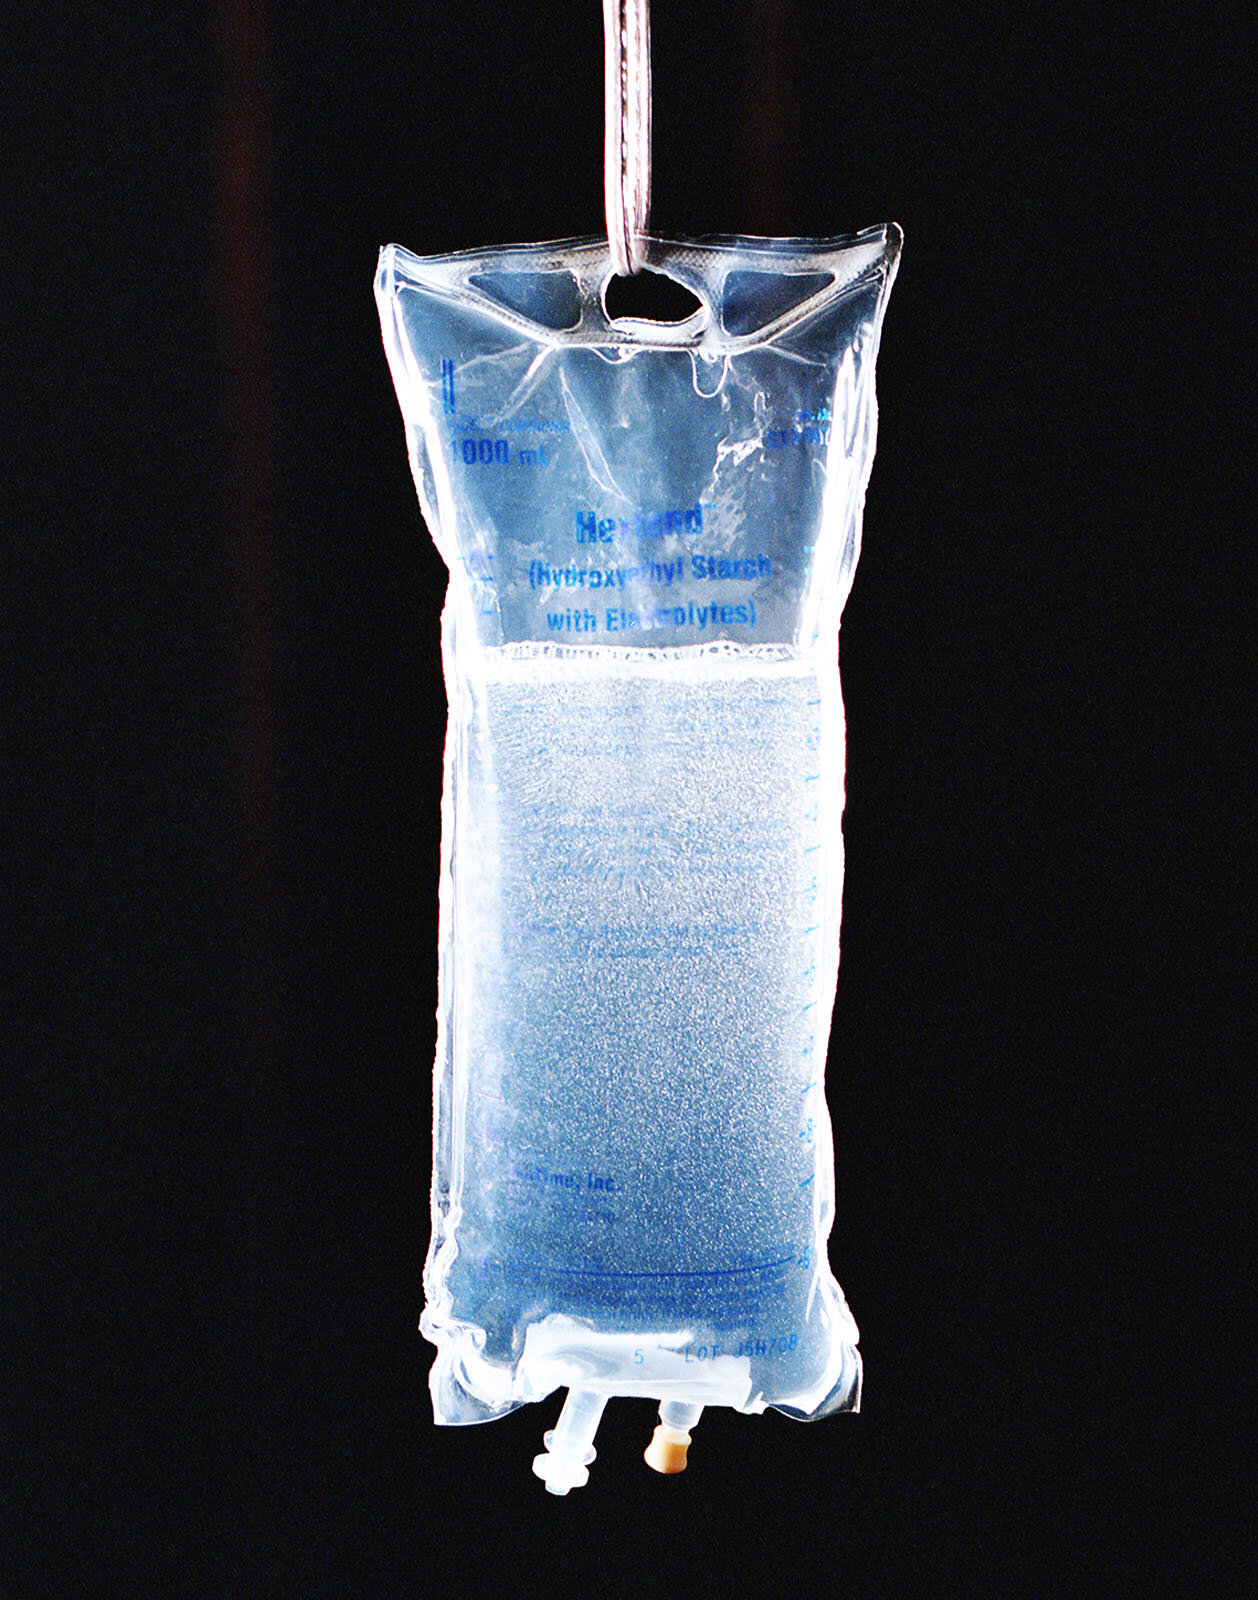  Hextend, a plasma replacement fluid poured into a patients bodies after they pass preventing the deterioration of tissues as their body is cooled to −120°C and then held in cryostasis 